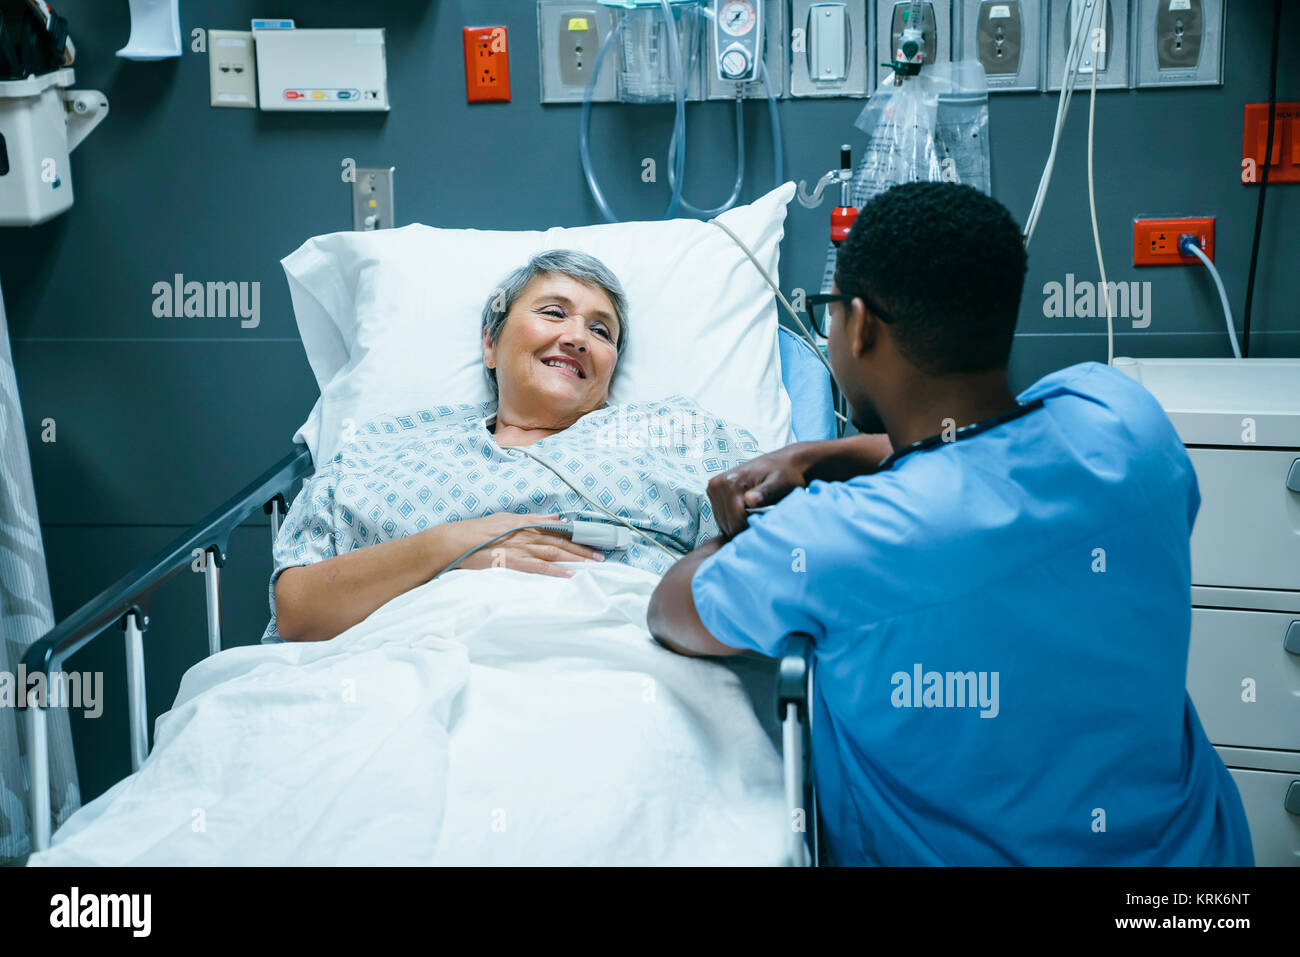 Nurse talking to patient in hospital bed Stock Photo